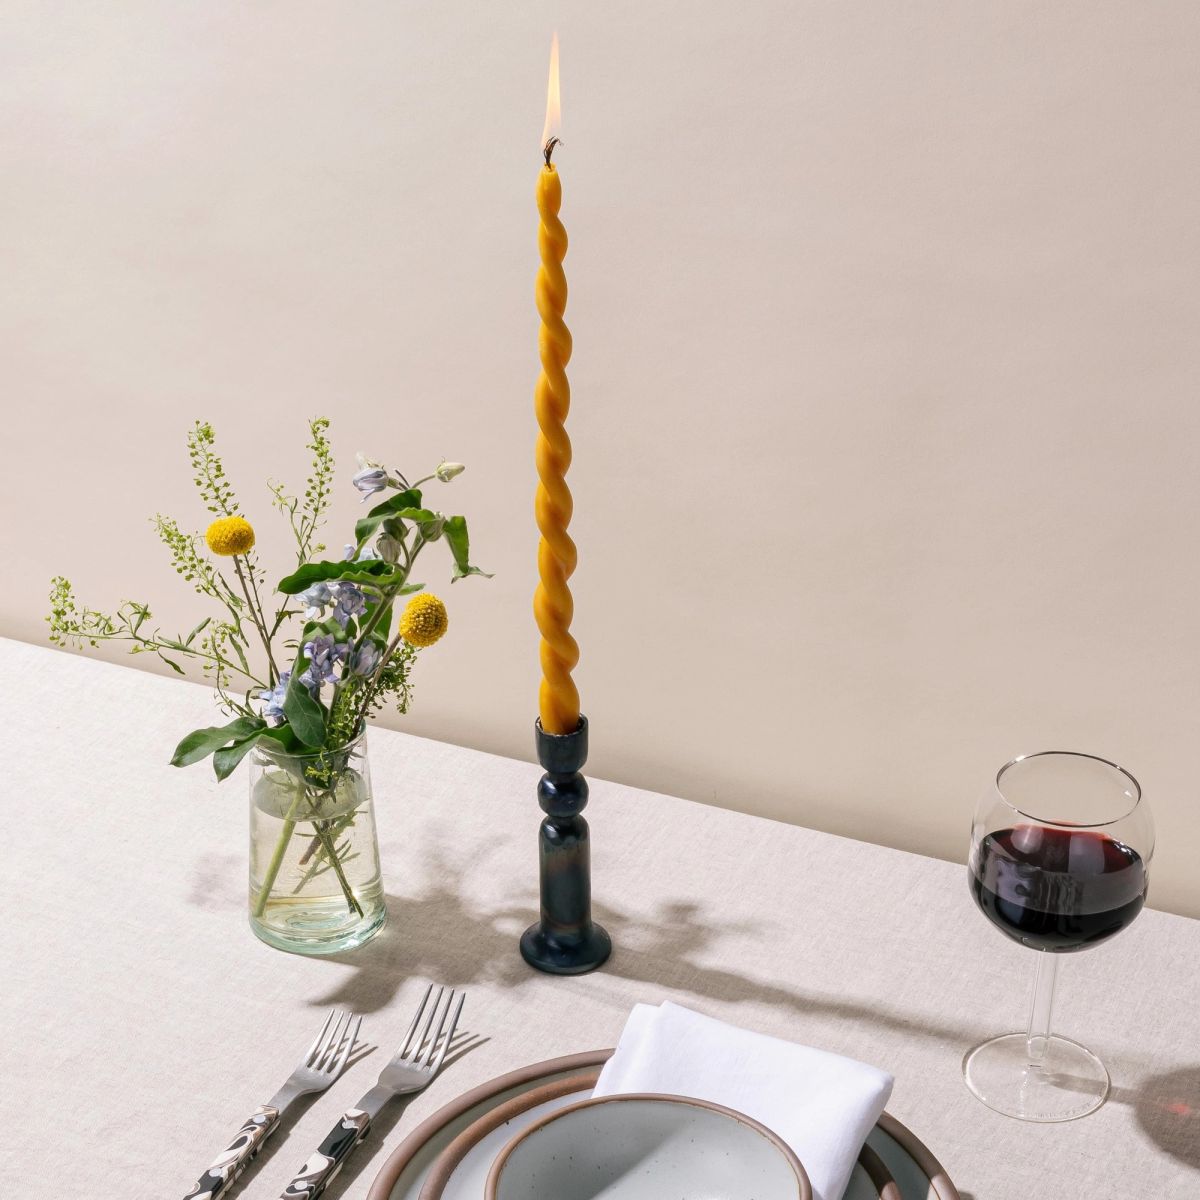 A iron candlestick holder with a lit twisted beeswax taper candle, a glass of flowers, a glass of red wine and a table setting all sit on a table against a cream background.